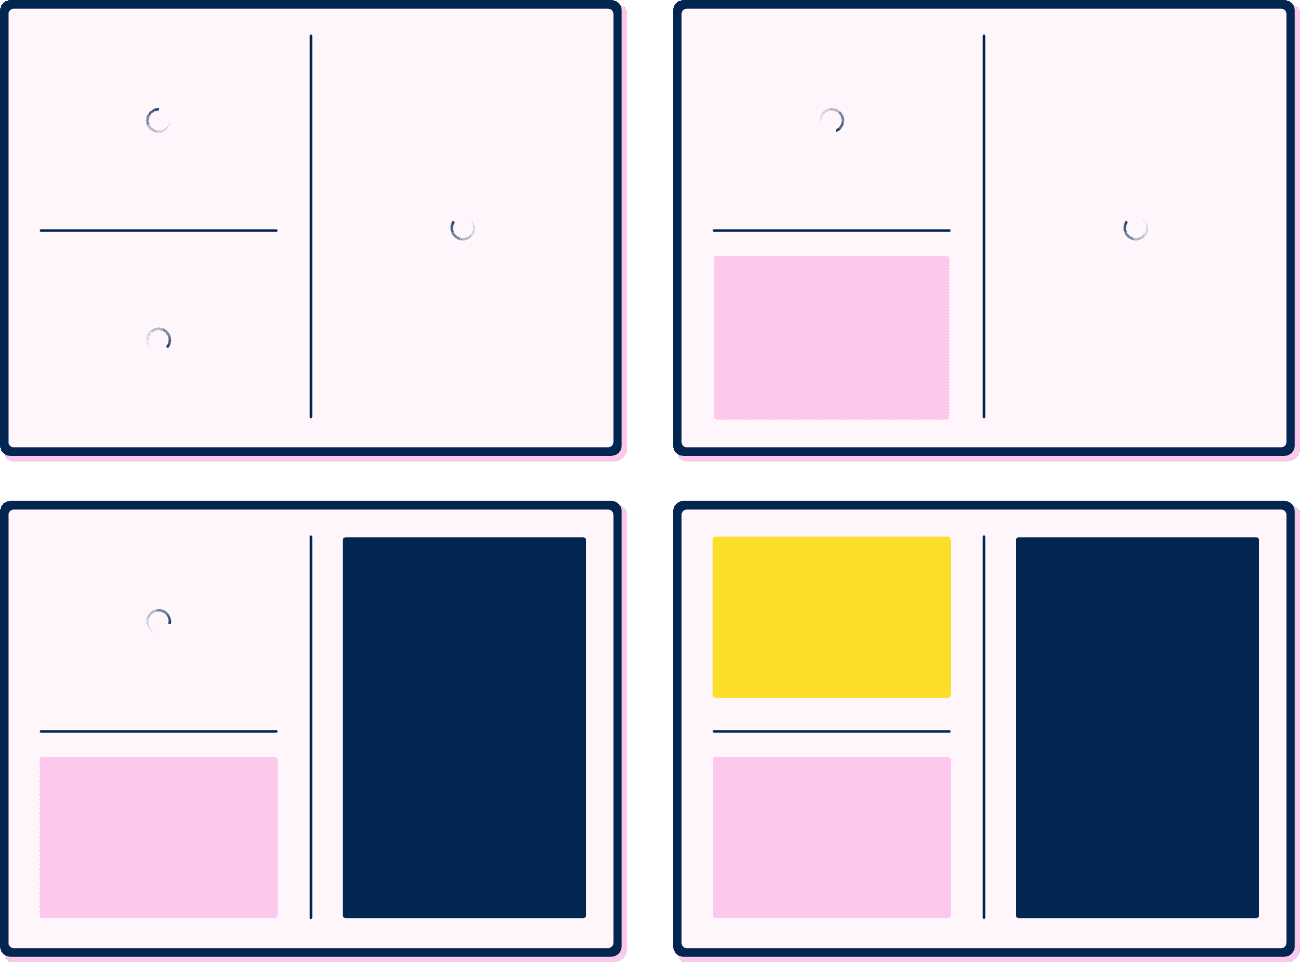 Mockup of four different stages an app's loading sequence might go through if different parts of the page resolve at different times